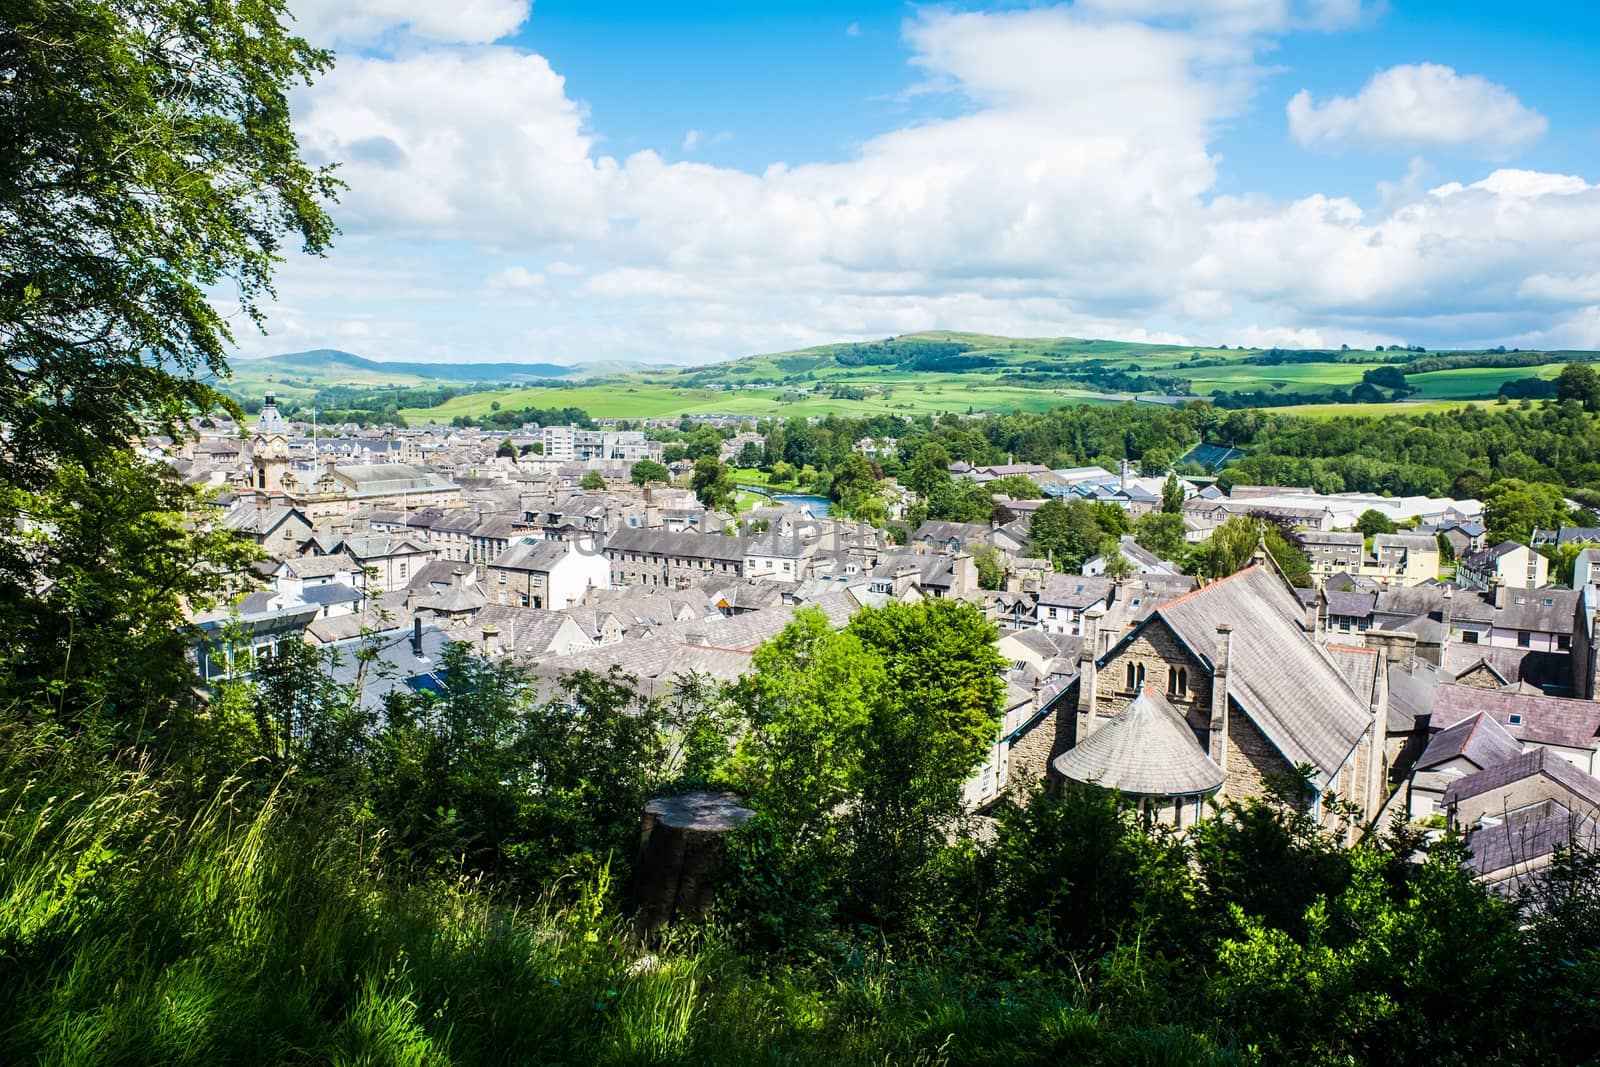 aerial view of Kendal town centre, Cumbria, UK